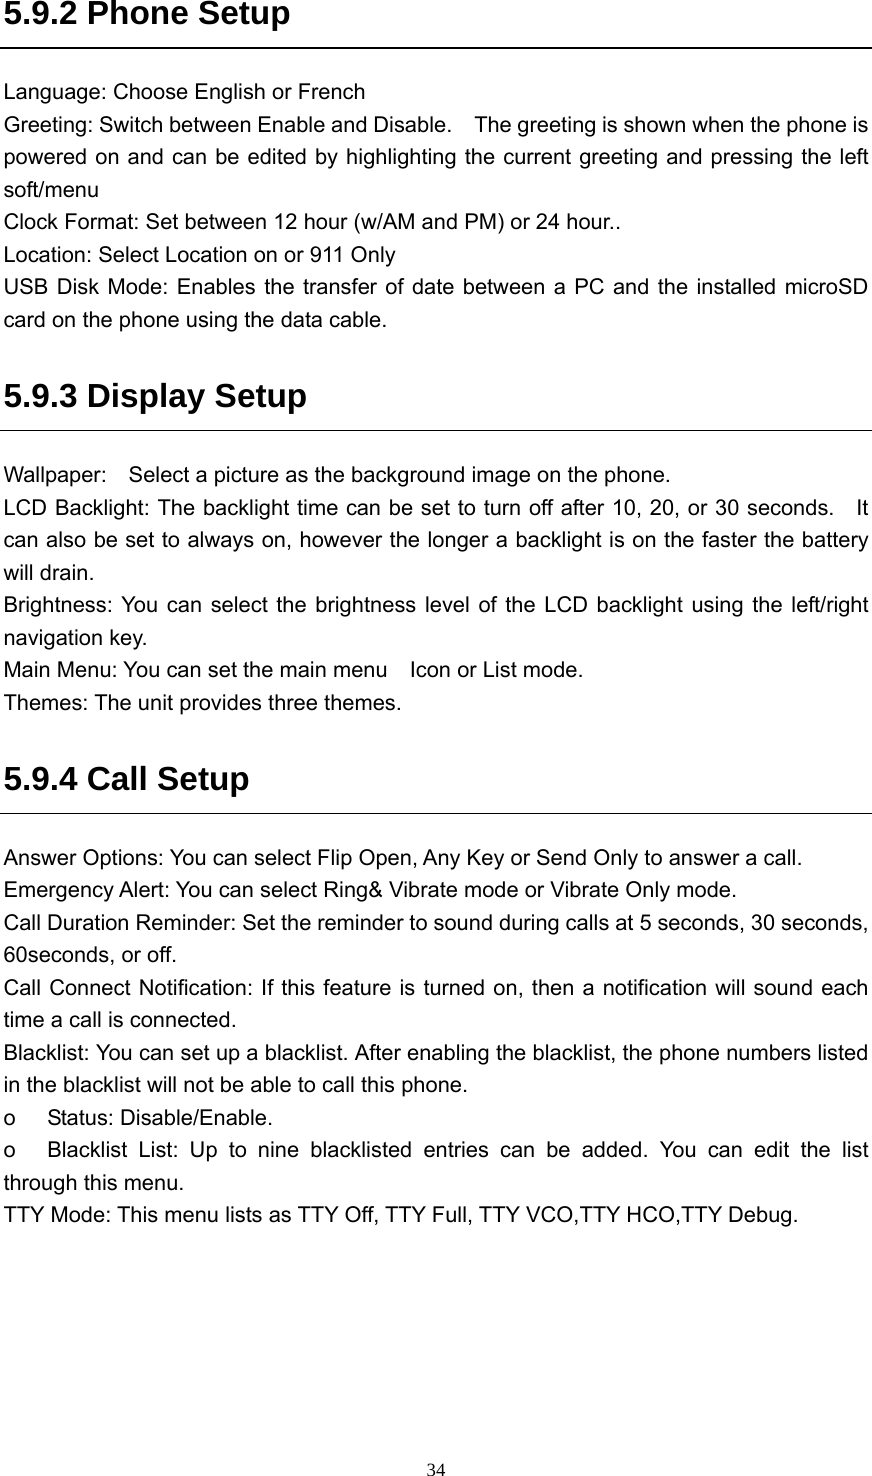  345.9.2 Phone Setup Language: Choose English or French Greeting: Switch between Enable and Disable.  The greeting is shown when the phone is powered on and can be edited by highlighting the current greeting and pressing the left soft/menu Clock Format: Set between 12 hour (w/AM and PM) or 24 hour.. Location: Select Location on or 911 Only USB Disk Mode: Enables the transfer of date between a PC and the installed microSD card on the phone using the data cable. 5.9.3 Display Setup Wallpaper:    Select a picture as the background image on the phone. LCD Backlight: The backlight time can be set to turn off after 10, 20, or 30 seconds.    It can also be set to always on, however the longer a backlight is on the faster the battery will drain. Brightness: You can select the brightness level of the LCD backlight using the left/right navigation key.   Main Menu: You can set the main menu    Icon or List mode. Themes: The unit provides three themes. 5.9.4 Call Setup     Answer Options: You can select Flip Open, Any Key or Send Only to answer a call. Emergency Alert: You can select Ring&amp; Vibrate mode or Vibrate Only mode. Call Duration Reminder: Set the reminder to sound during calls at 5 seconds, 30 seconds, 60seconds, or off.   Call Connect Notification: If this feature is turned on, then a notification will sound each time a call is connected.   Blacklist: You can set up a blacklist. After enabling the blacklist, the phone numbers listed in the blacklist will not be able to call this phone.   o Status: Disable/Enable. o  Blacklist List: Up to nine blacklisted entries can be added. You can edit the list through this menu.   TTY Mode: This menu lists as TTY Off, TTY Full, TTY VCO,TTY HCO,TTY Debug.   